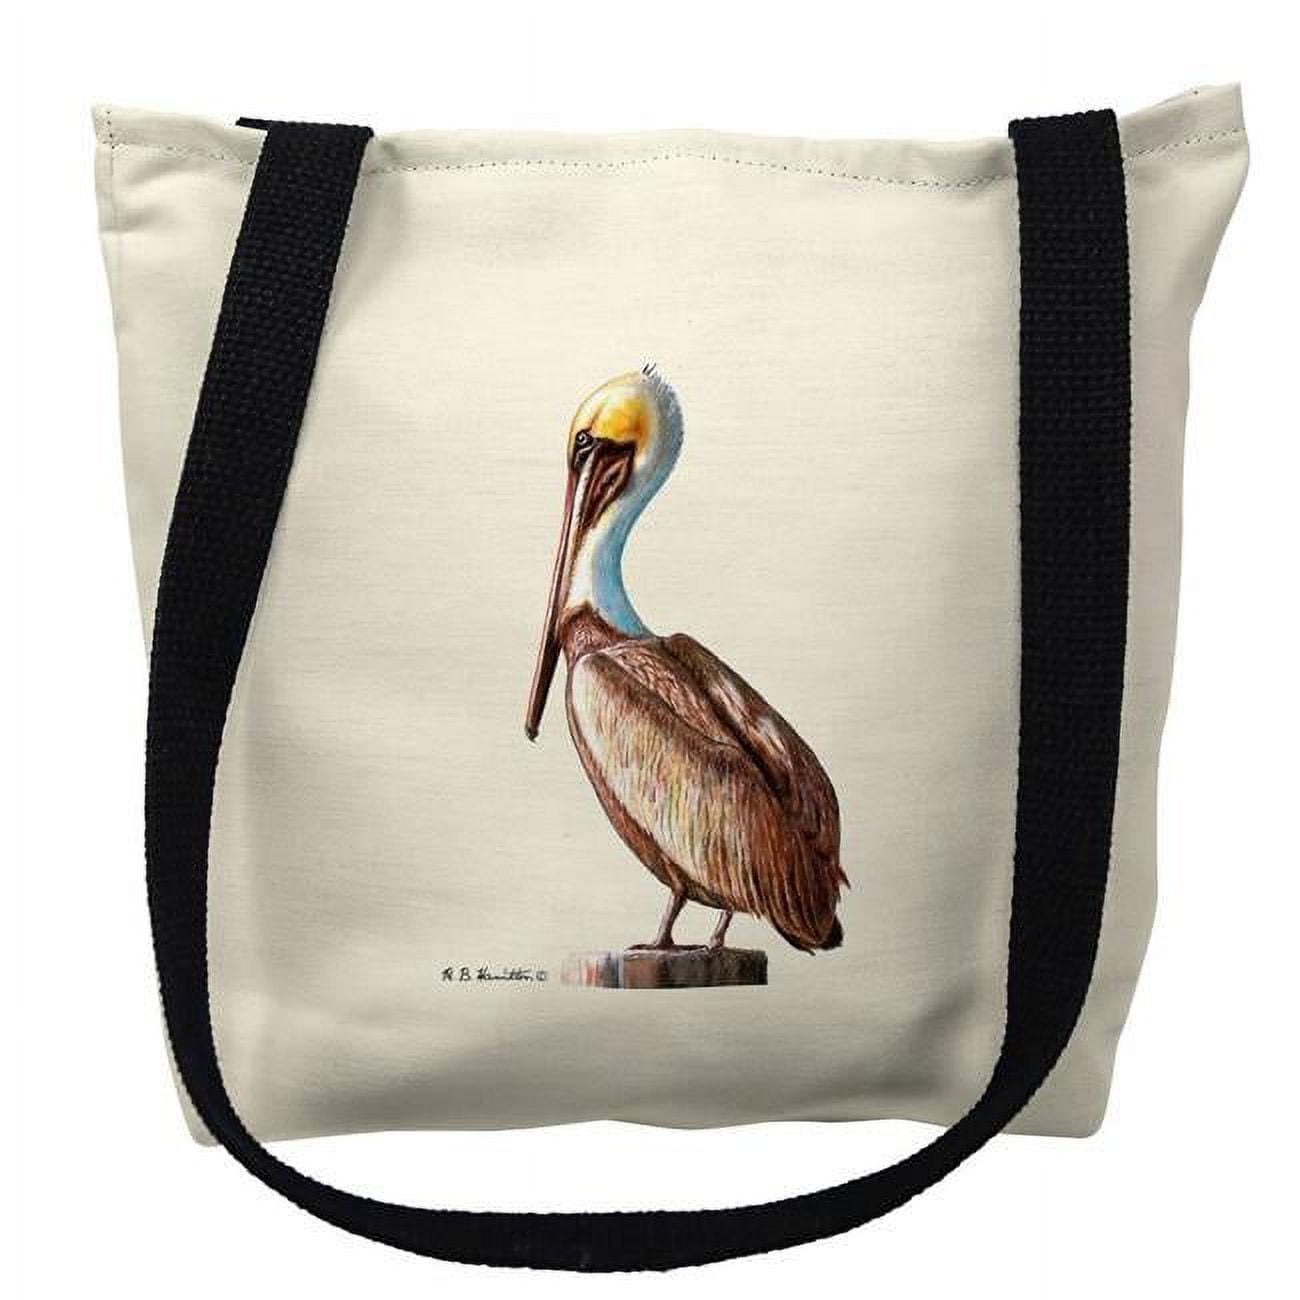 Ty035m 16 X 16 In. Pelican On White Tote Bag - Medium